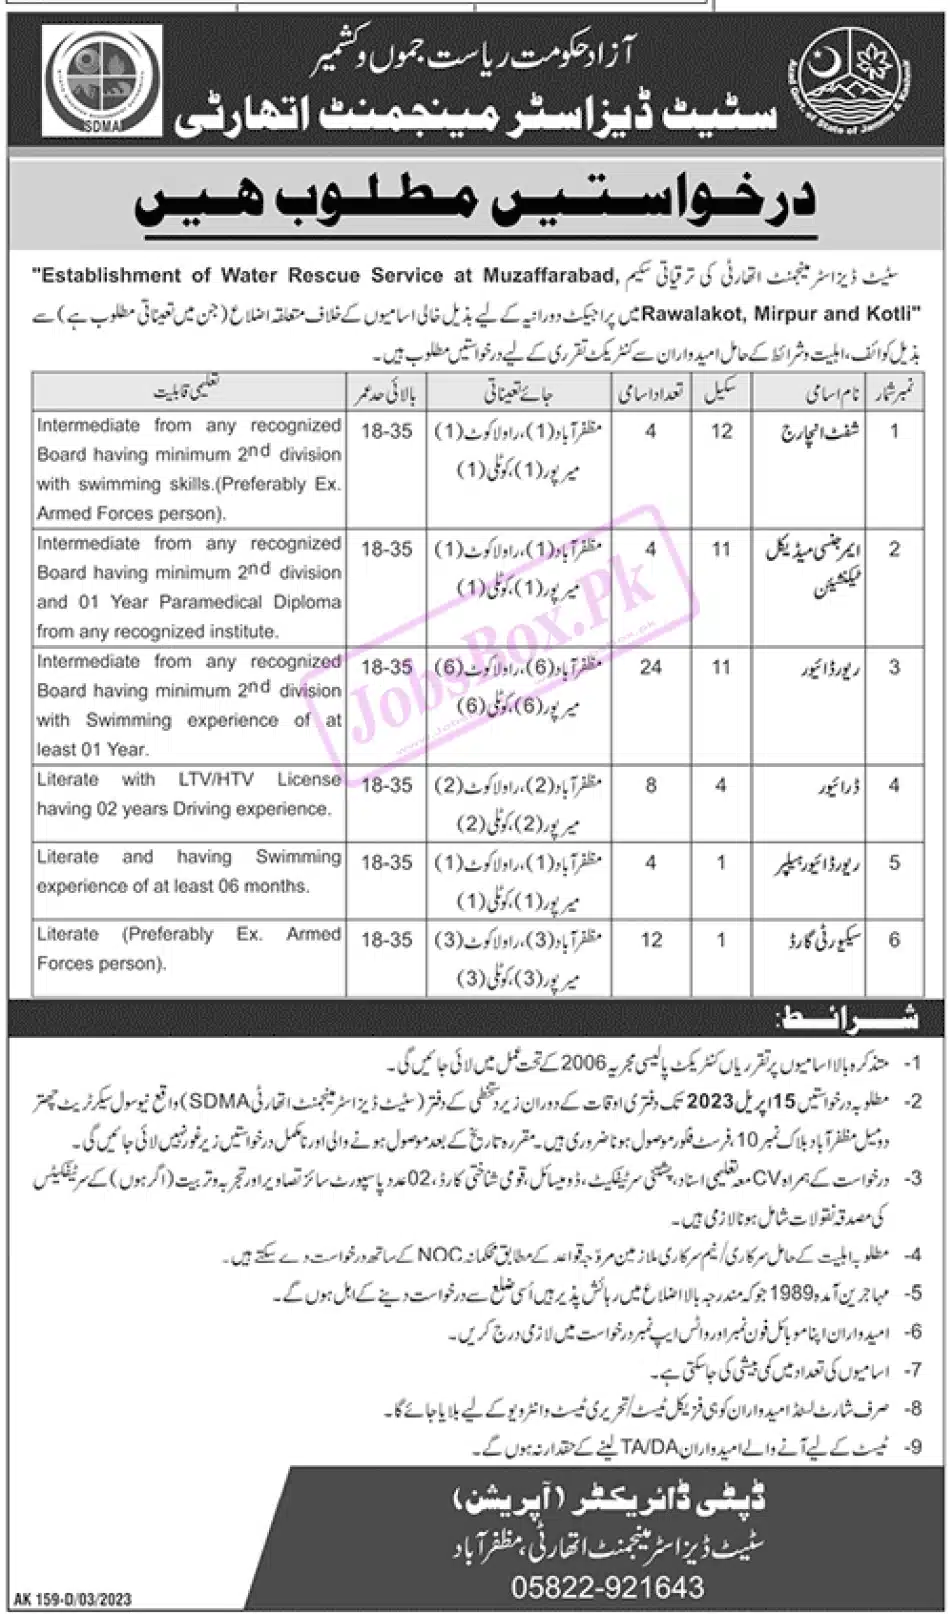 State Disaster Management Authority SDMA AJK Jobs 2023